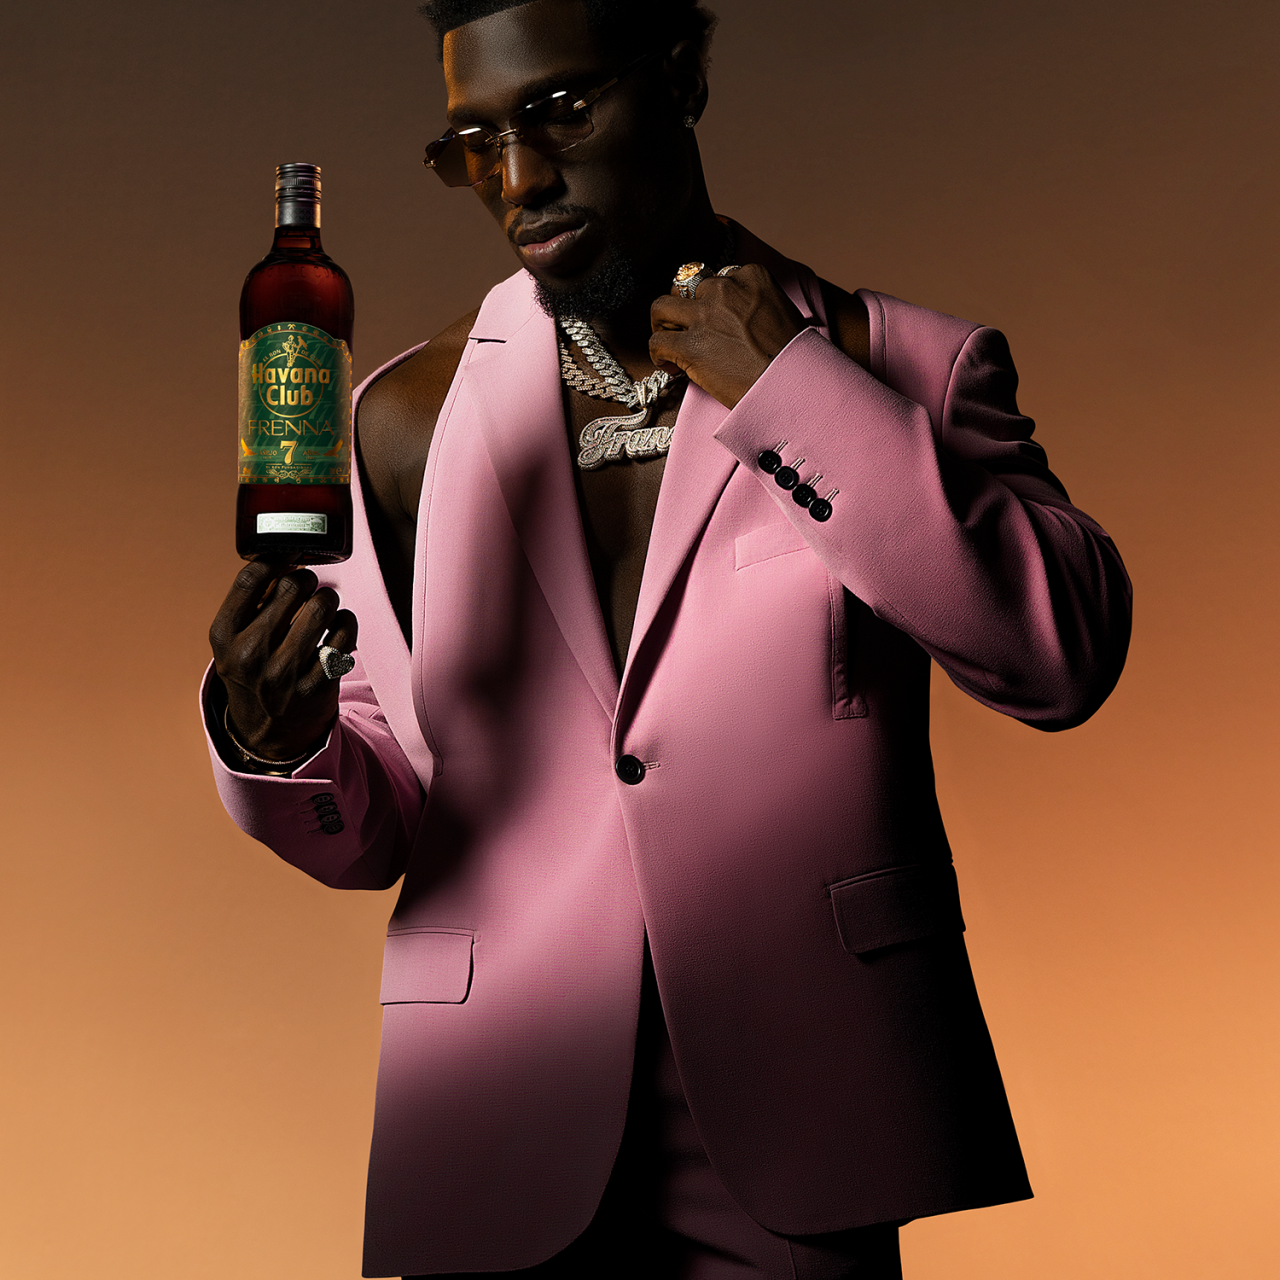 Havana Club et Frenna - collaboration exclusive "A Toast To The Culture"